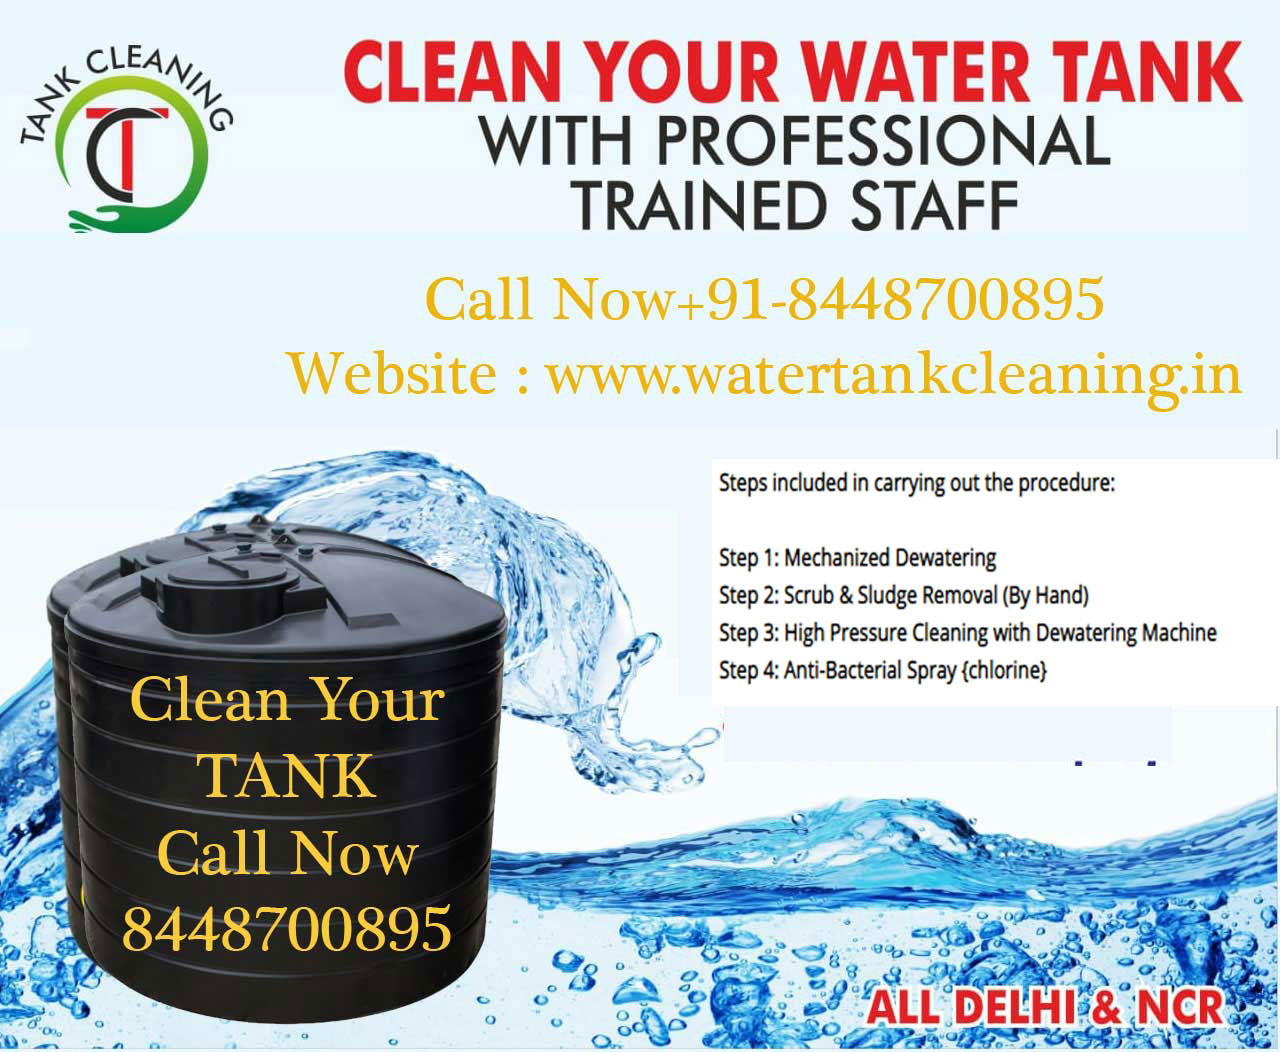 Jp water tank cleaning services in delhi